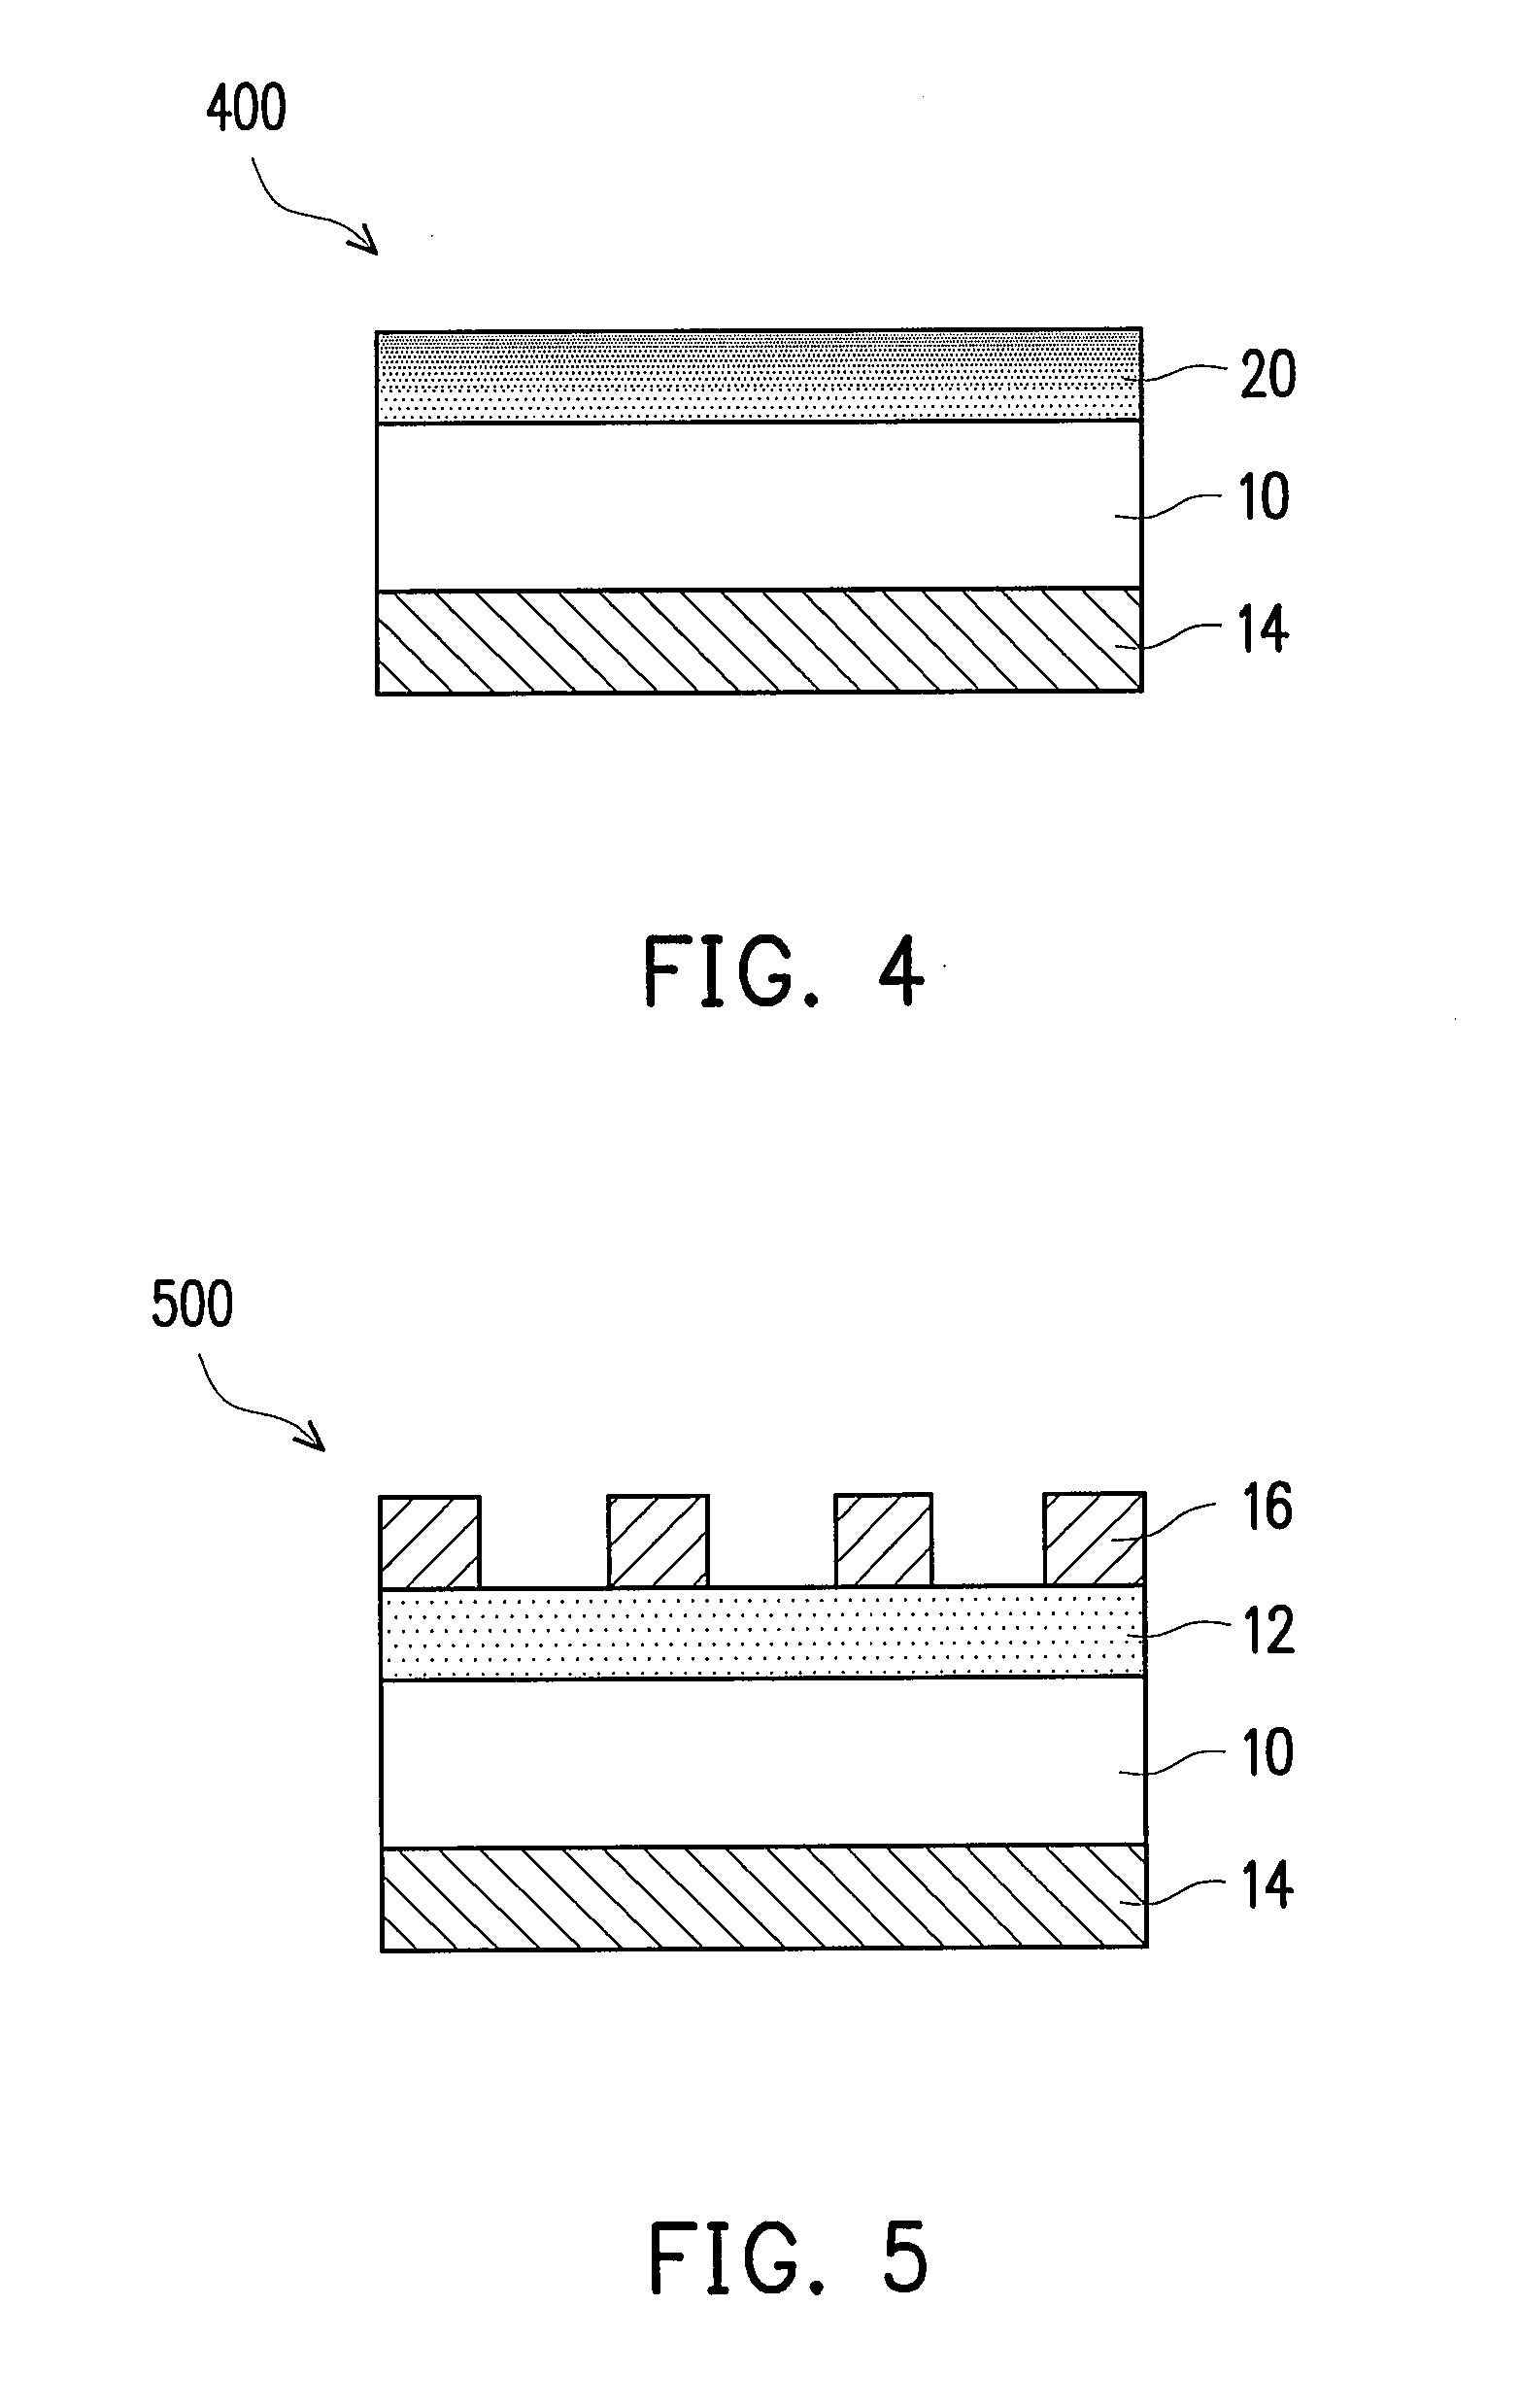 High performance optoelectronic device